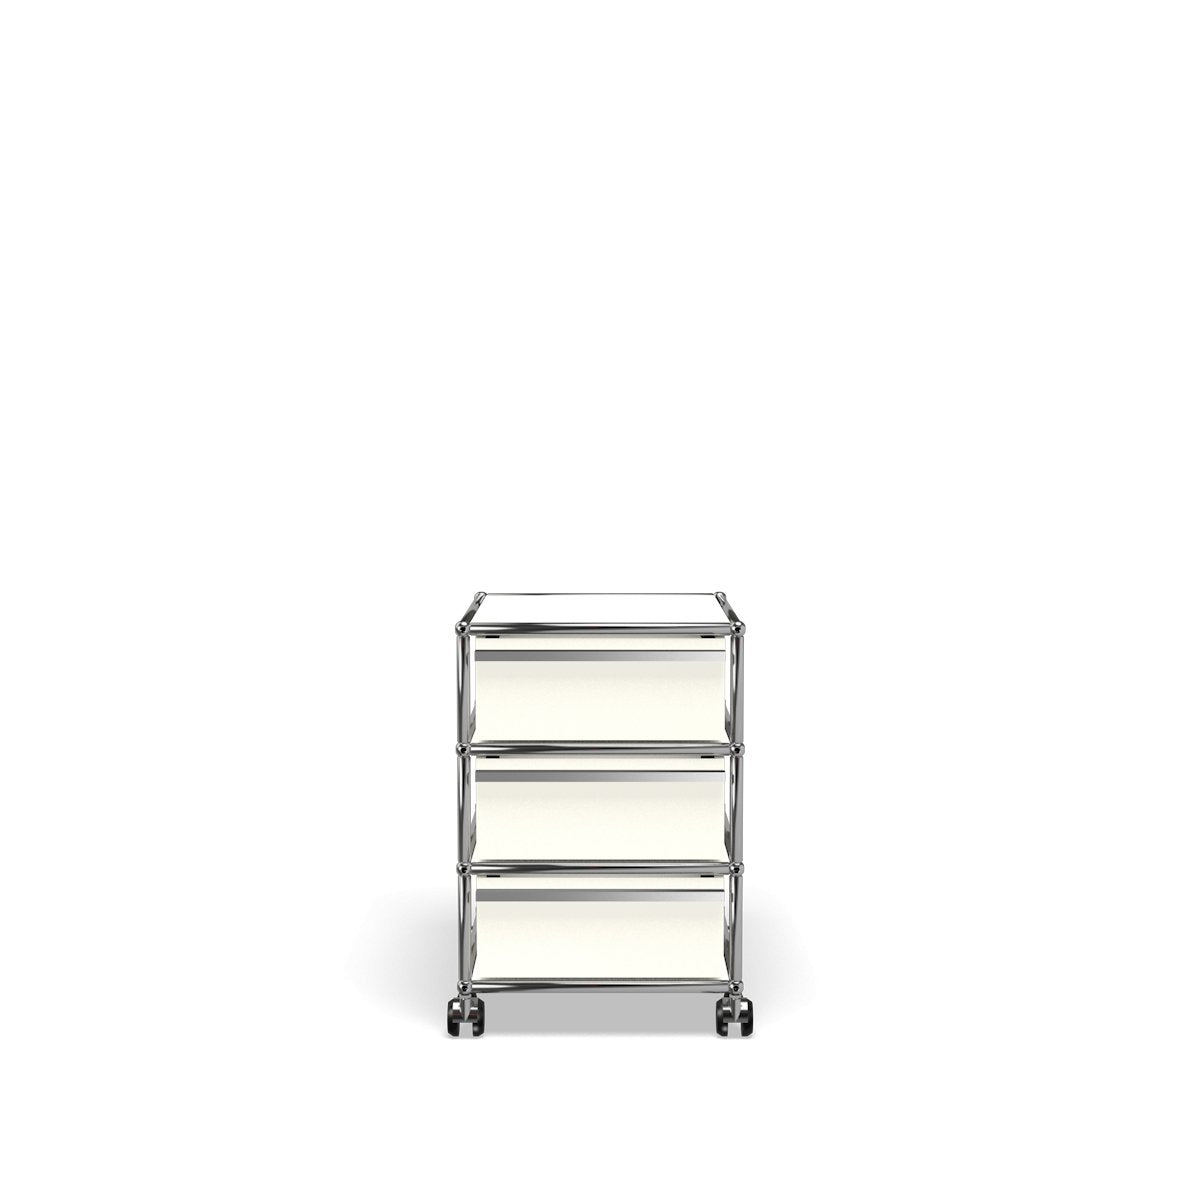 USM Modular Storage Pedestal with Drawers (V) in Pure White